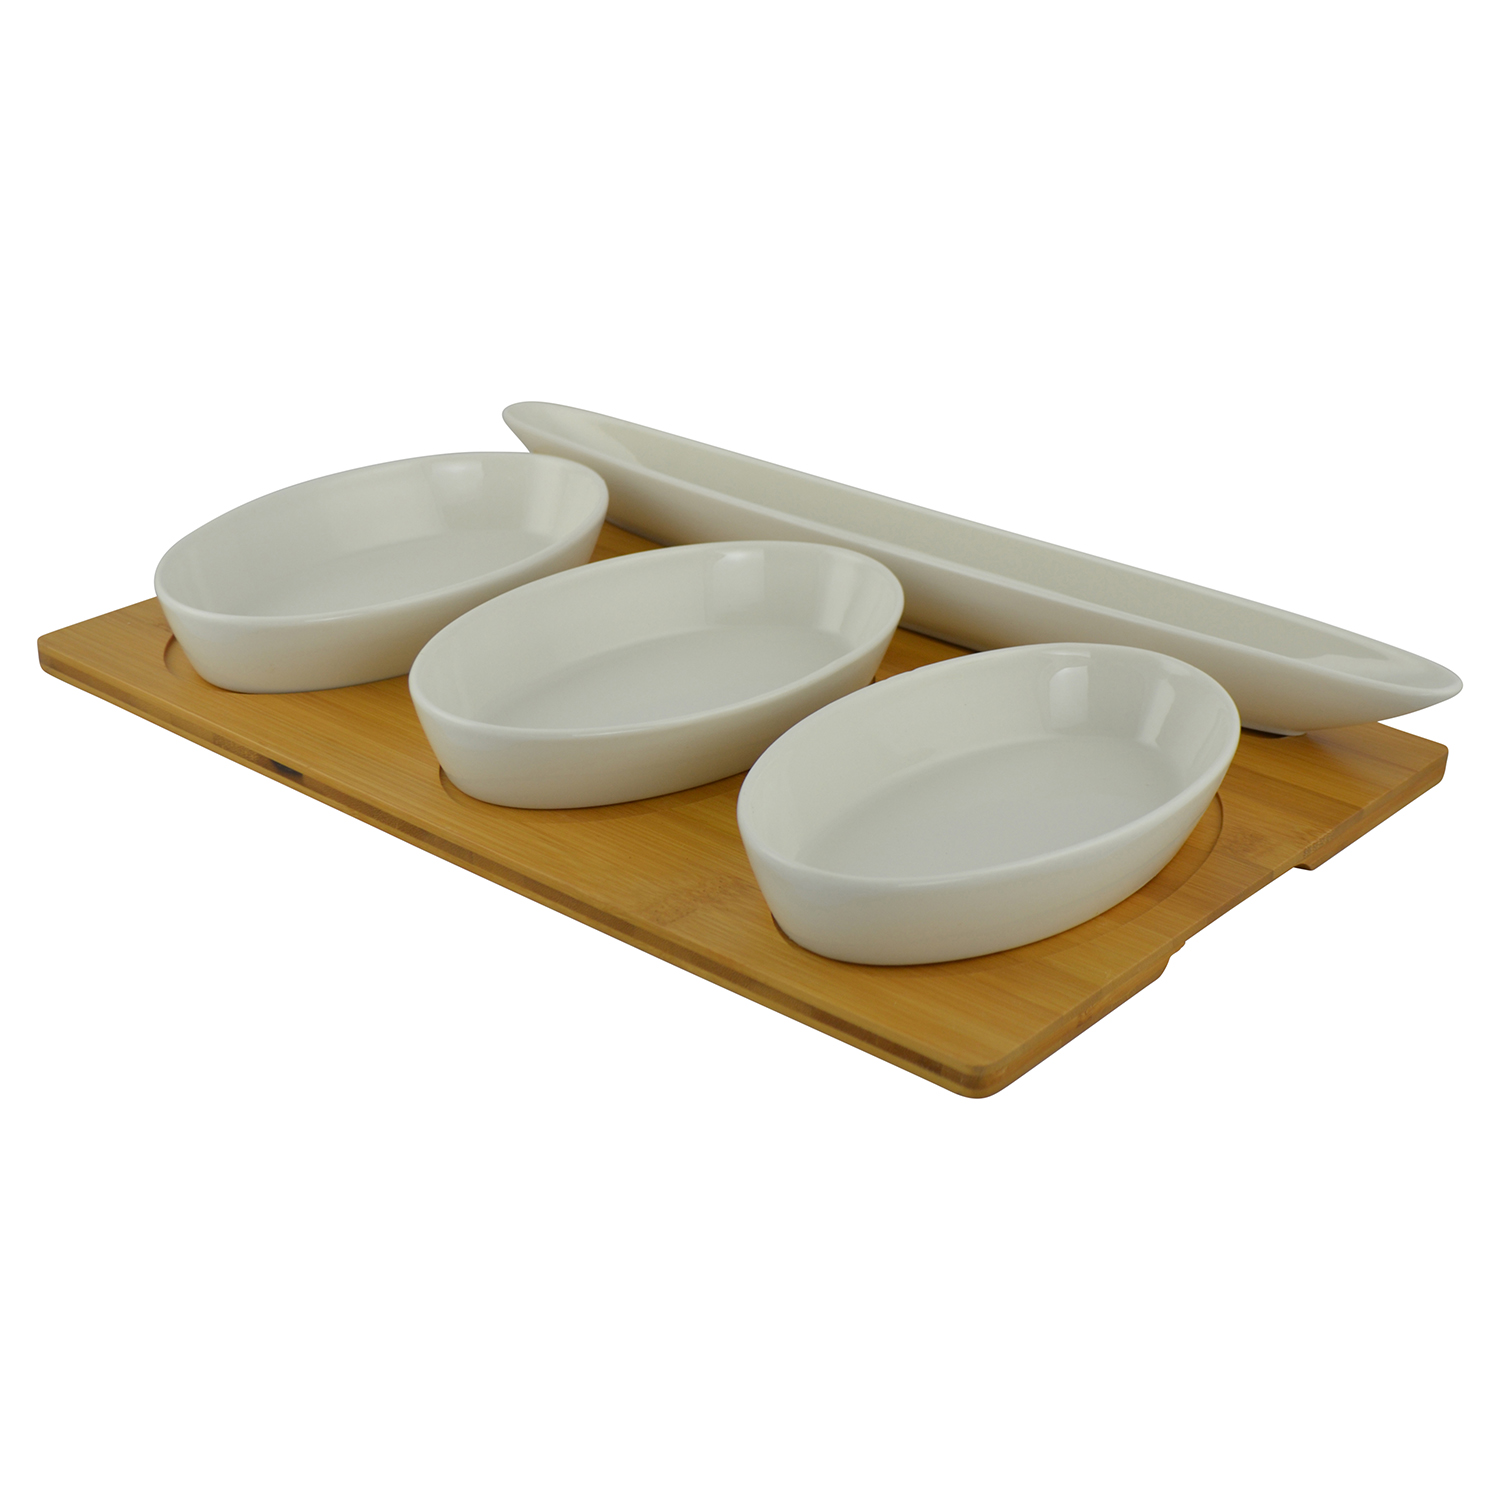 16X10, 3 & 1 HORS D'OEUVRES BOWLS